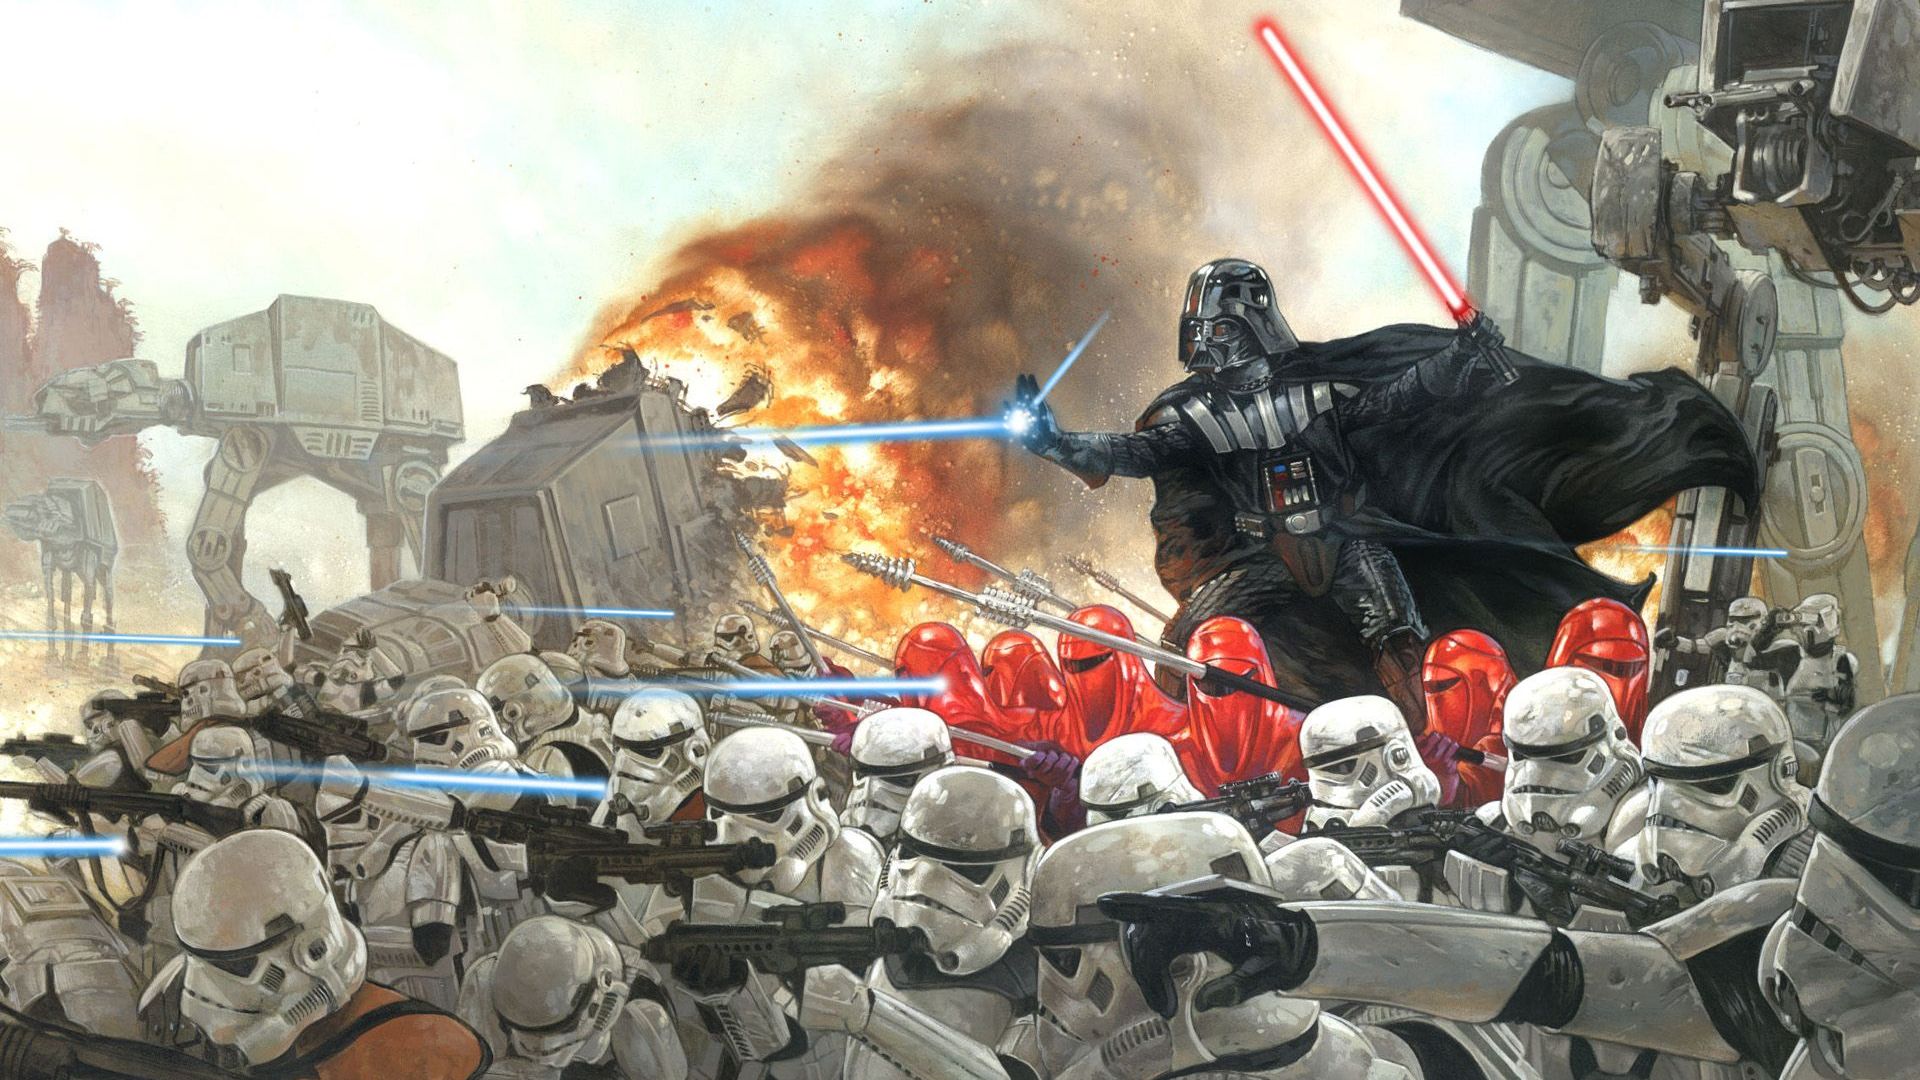   vader and stormtroopers in battle game hd wallpaper 1920x1080 2943